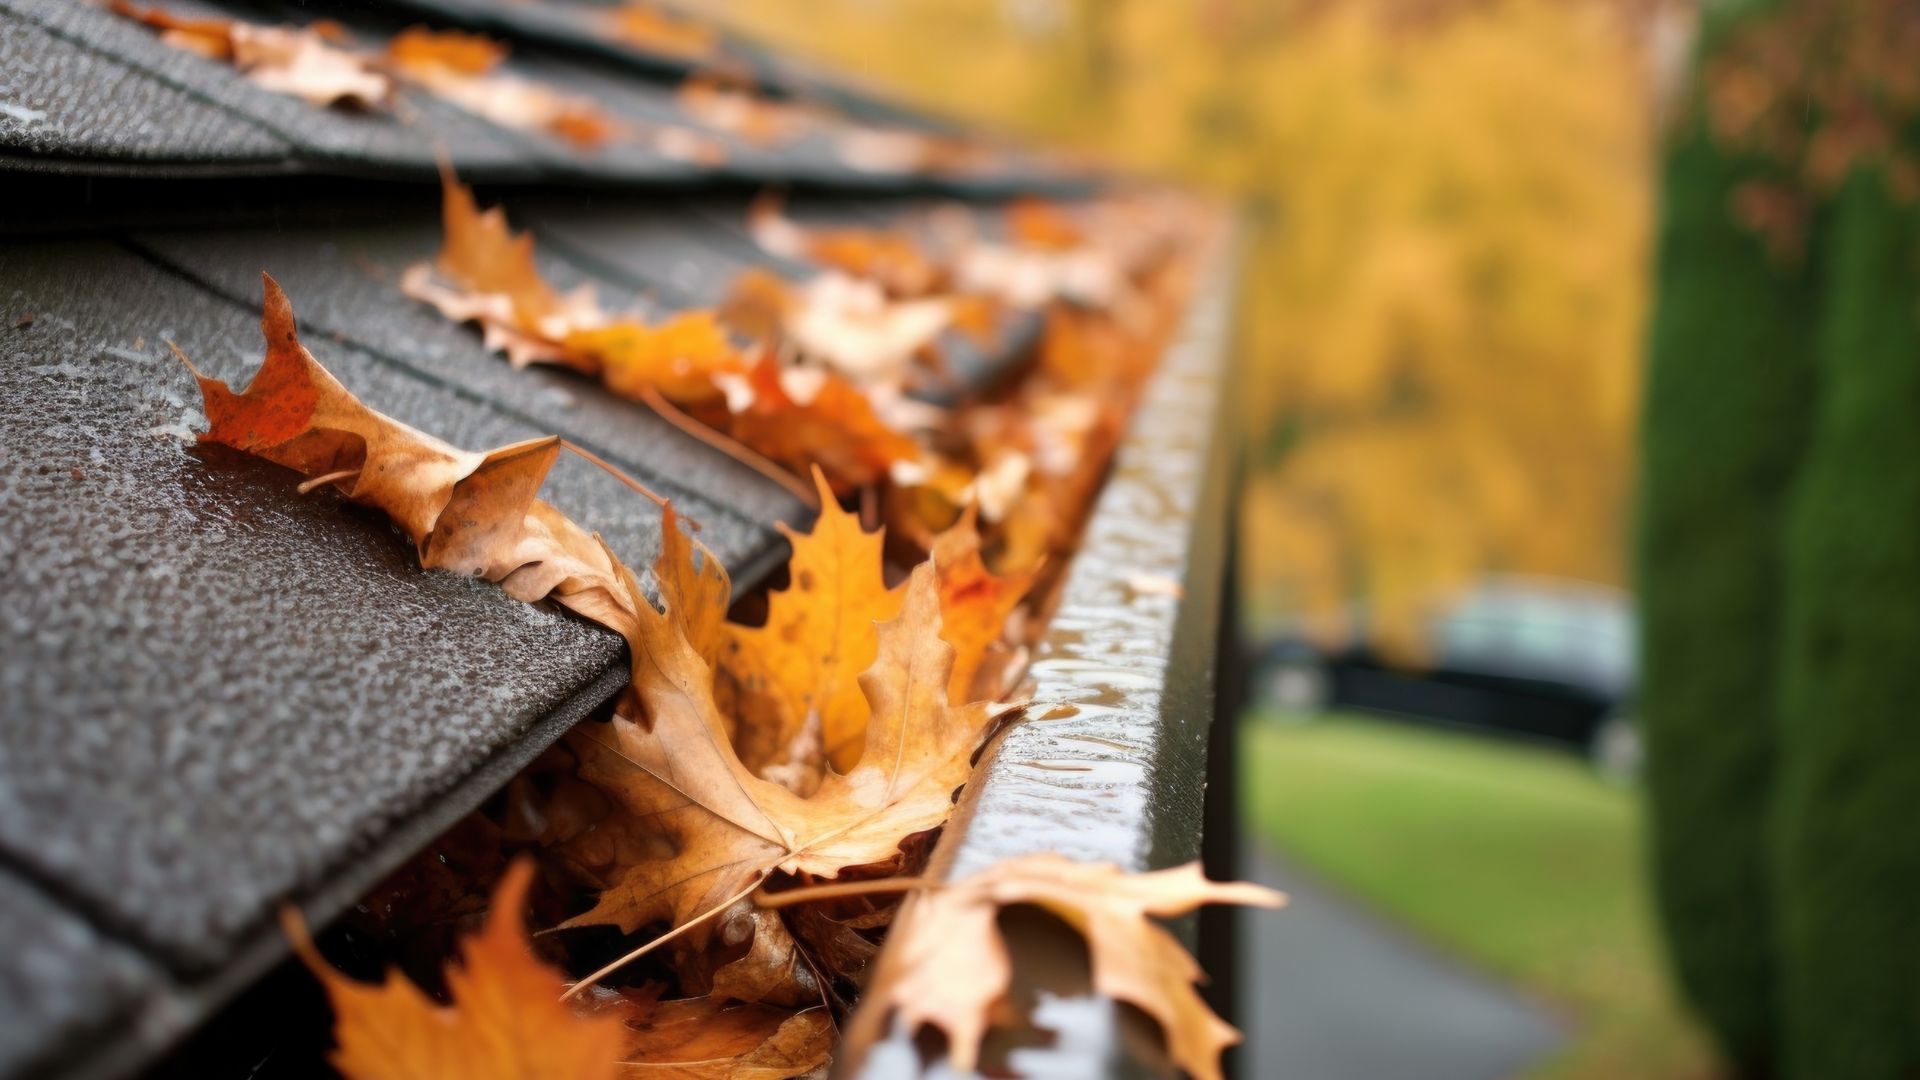 Leaves that need to be cleaned out of gutters in the fall.